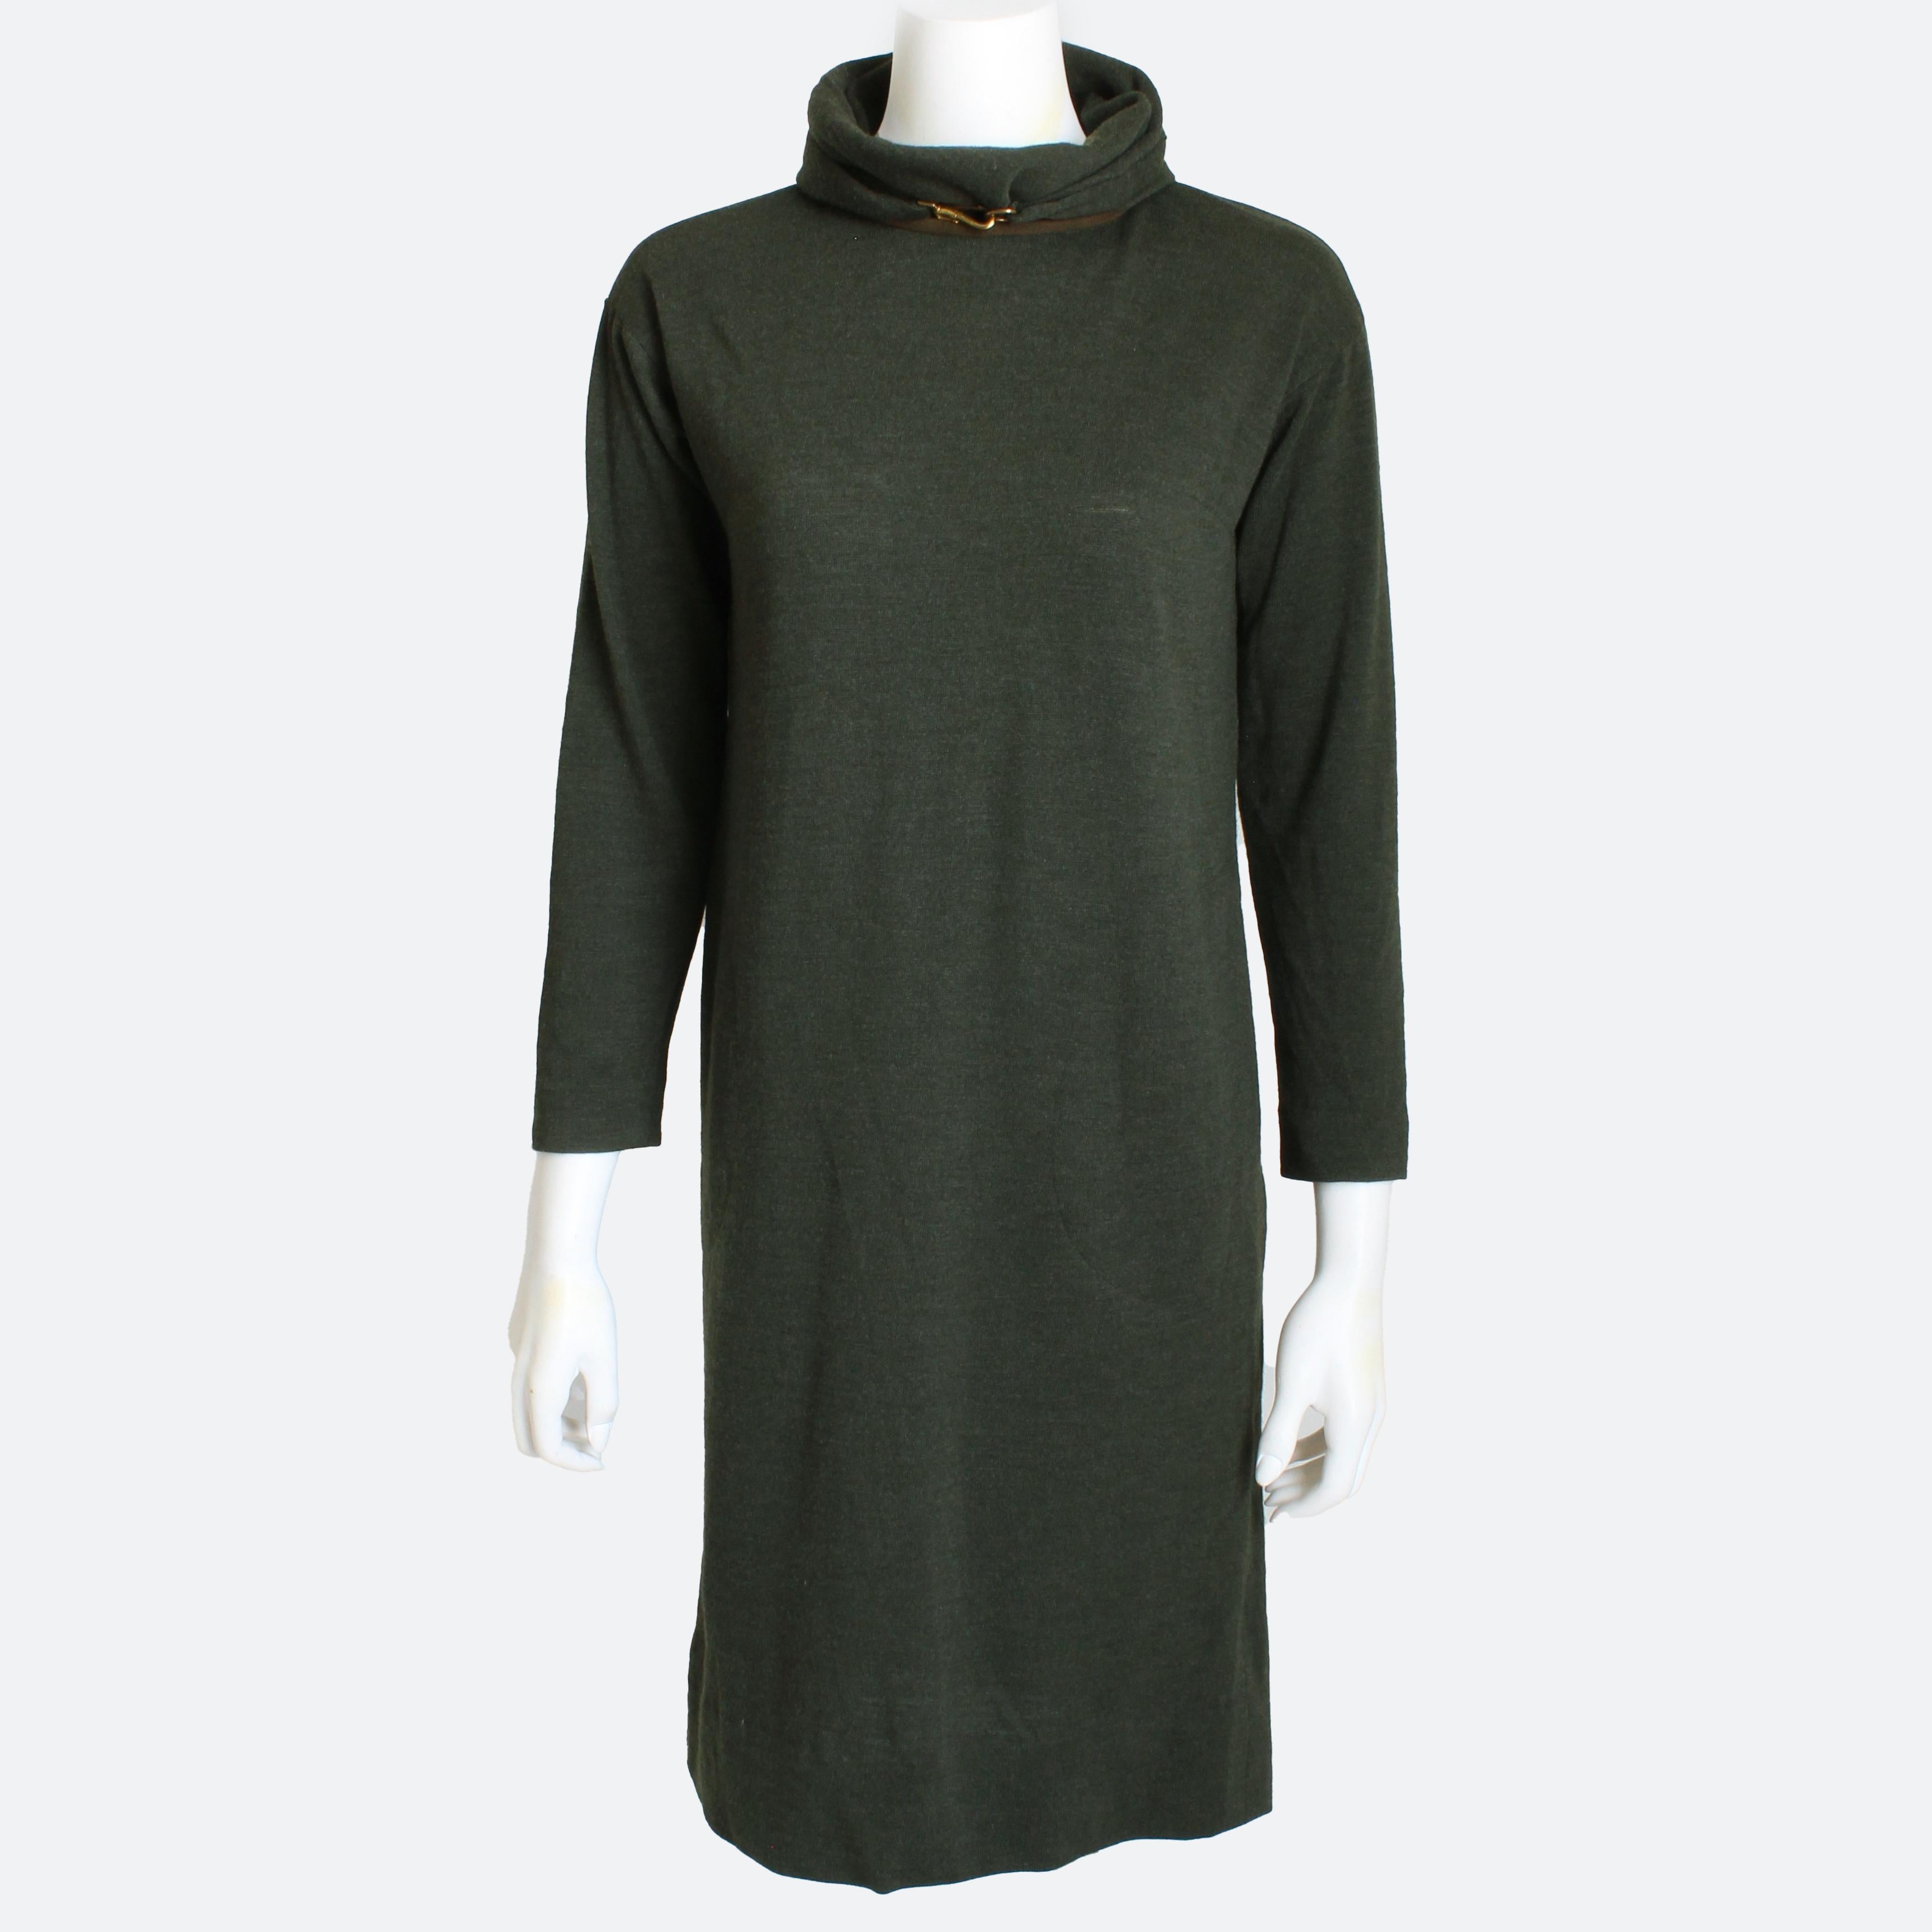 Bonnie Cashin for Sills soft wool dress with collar, suede trim and adjustable dog leash clasp, likely made in the 60s.  Made from a Loden green hued wool knit, it features an adjustable collar with dog leash clasp that can be styled in various ways